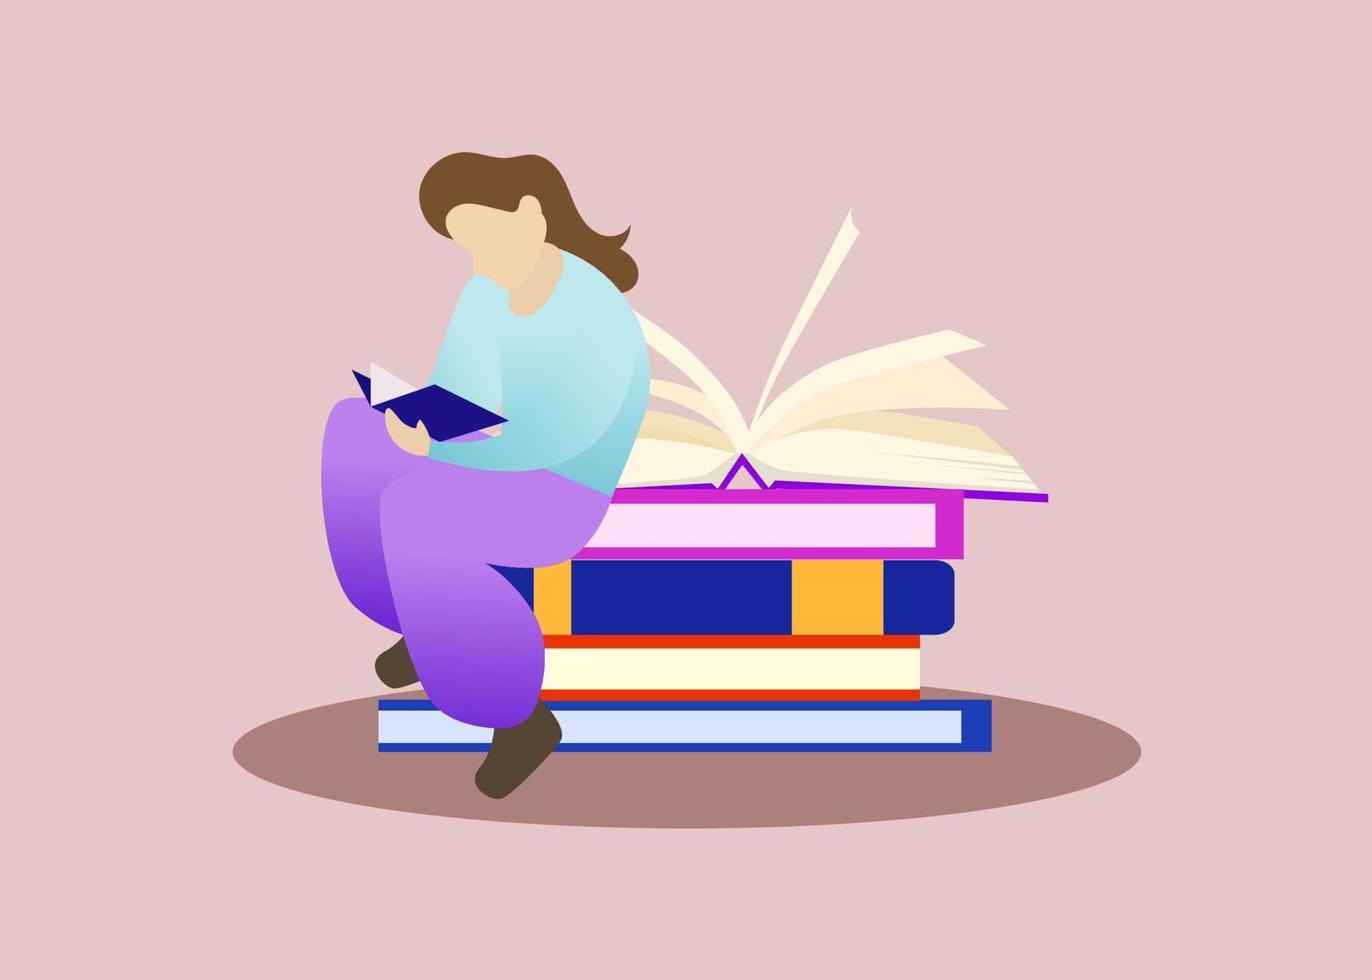 reading a book vector illustration, girl reading a book and sitting in a stack, education concept, library icon, smart young teenager, students read books to increase knowledge illustration